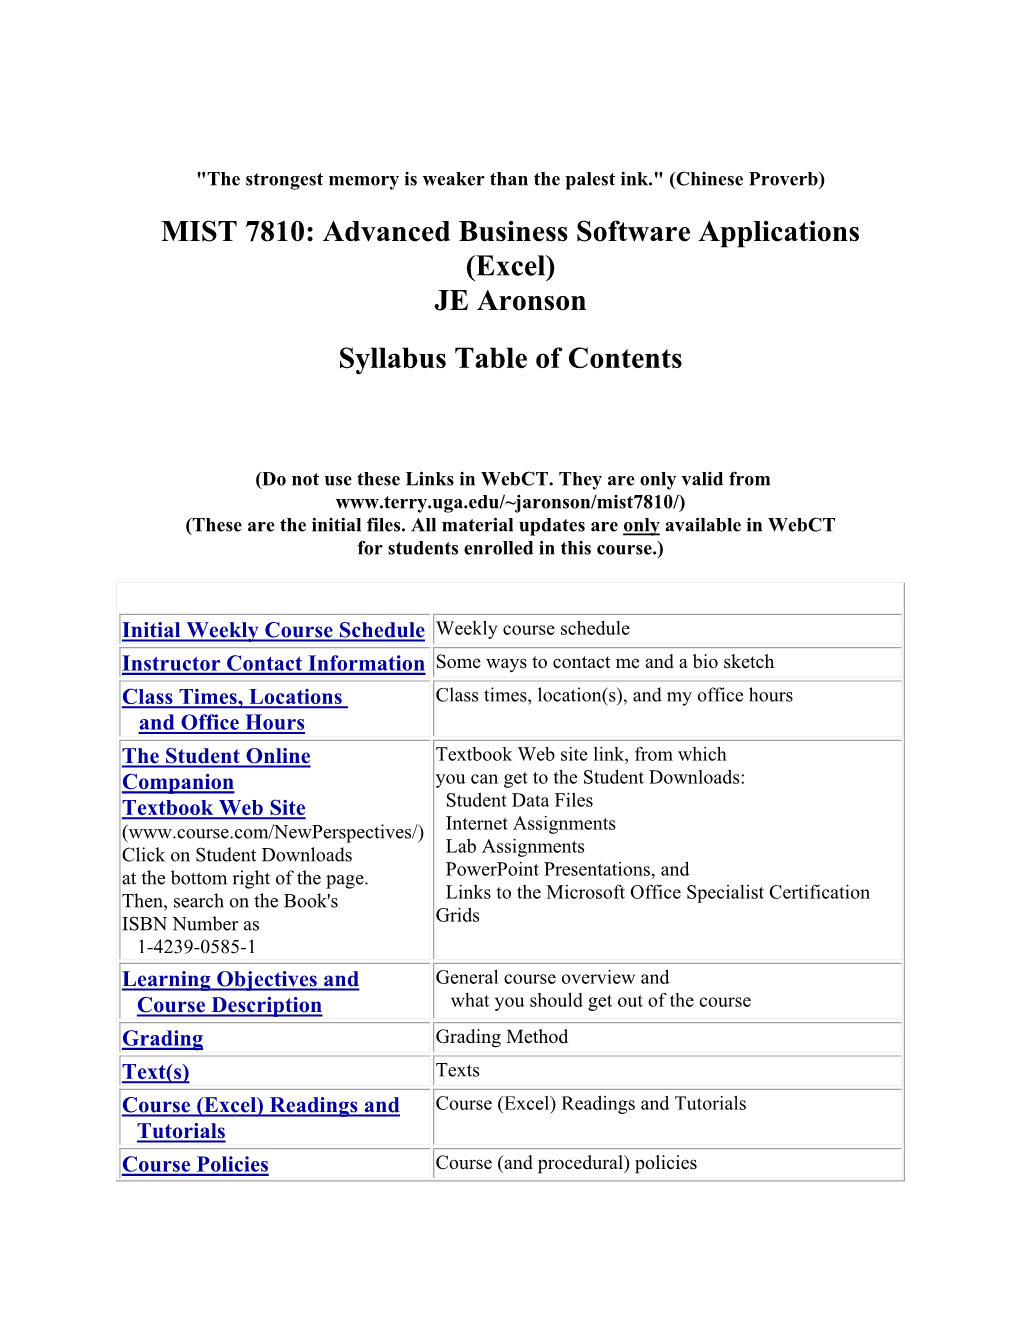 MIST 7810: Advanced Business Software Applications (Excel) JE Aronson Syllabus Table of Contents